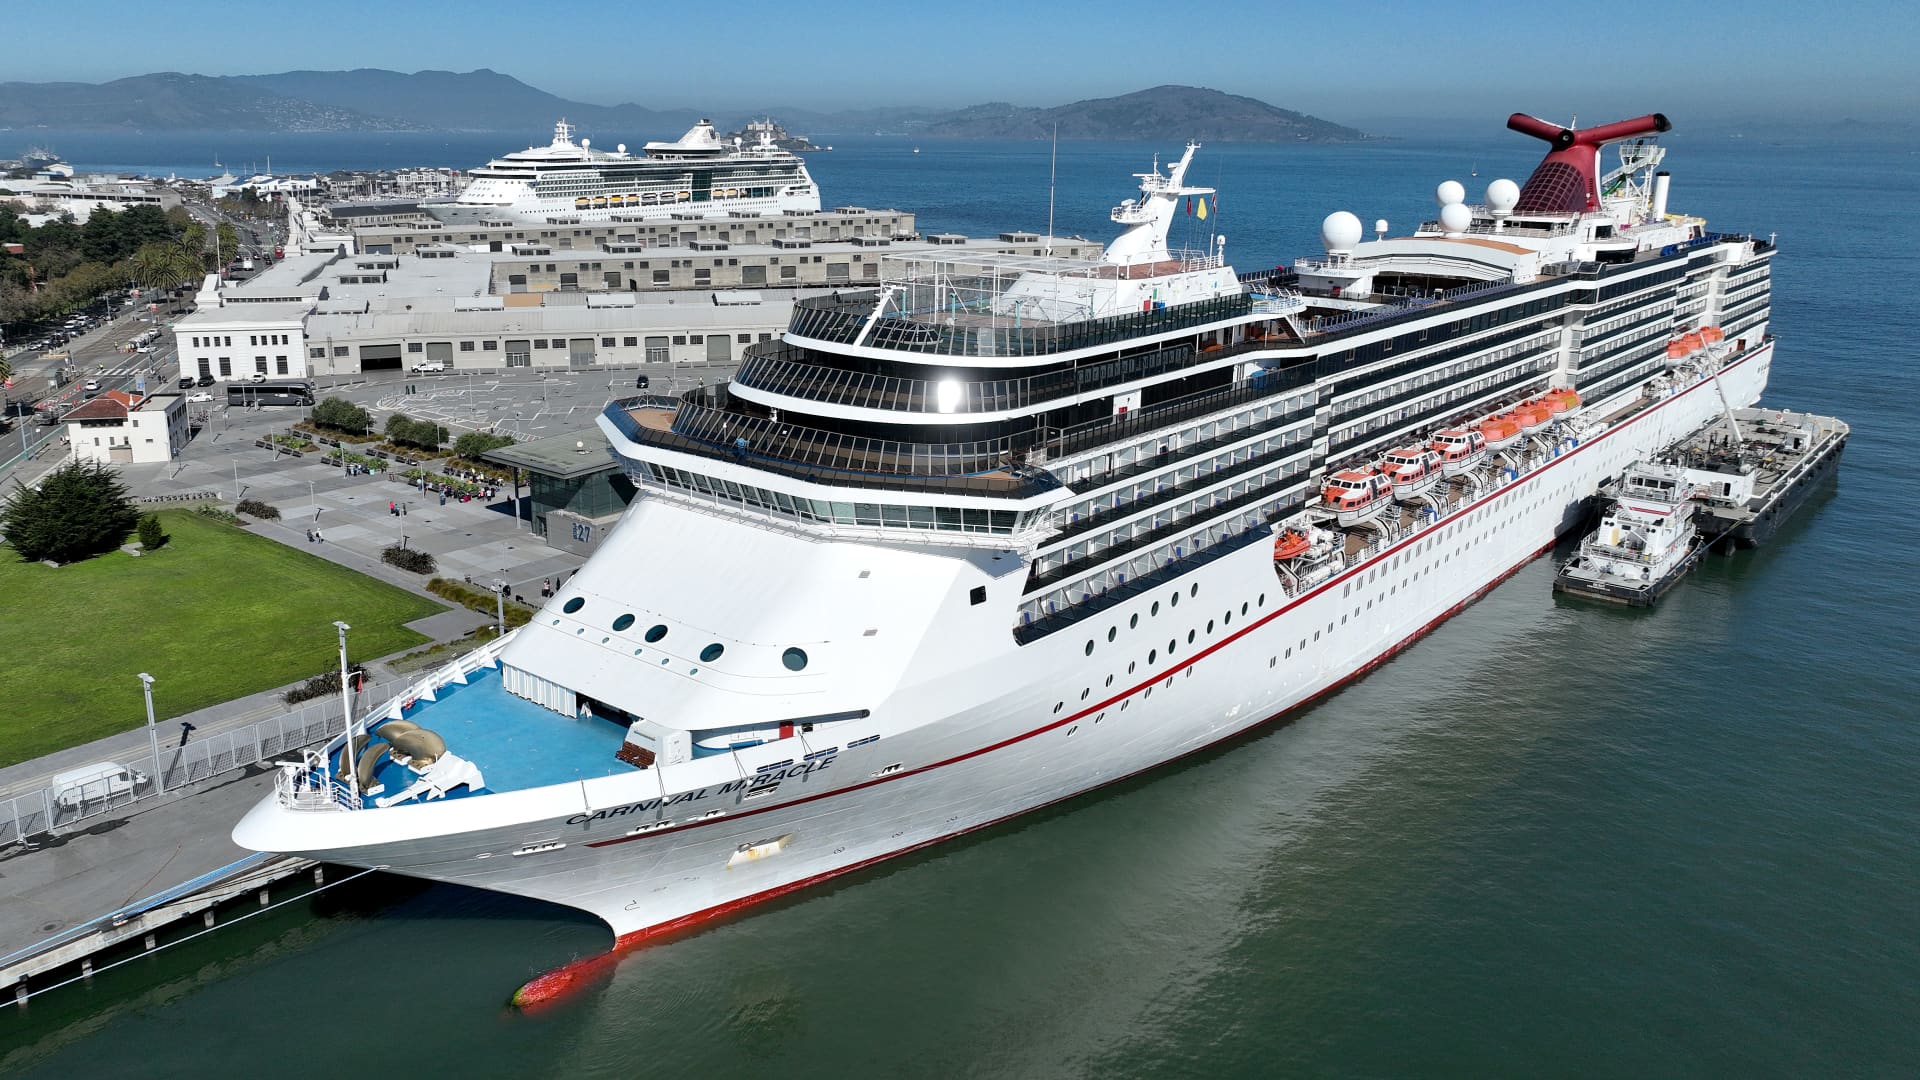 In an aerial view, the Carnival Miracle cruise ship operated by Carnival Cruise Line sits docked at Pier 27 in San Francisco on Sept. 30, 2022.